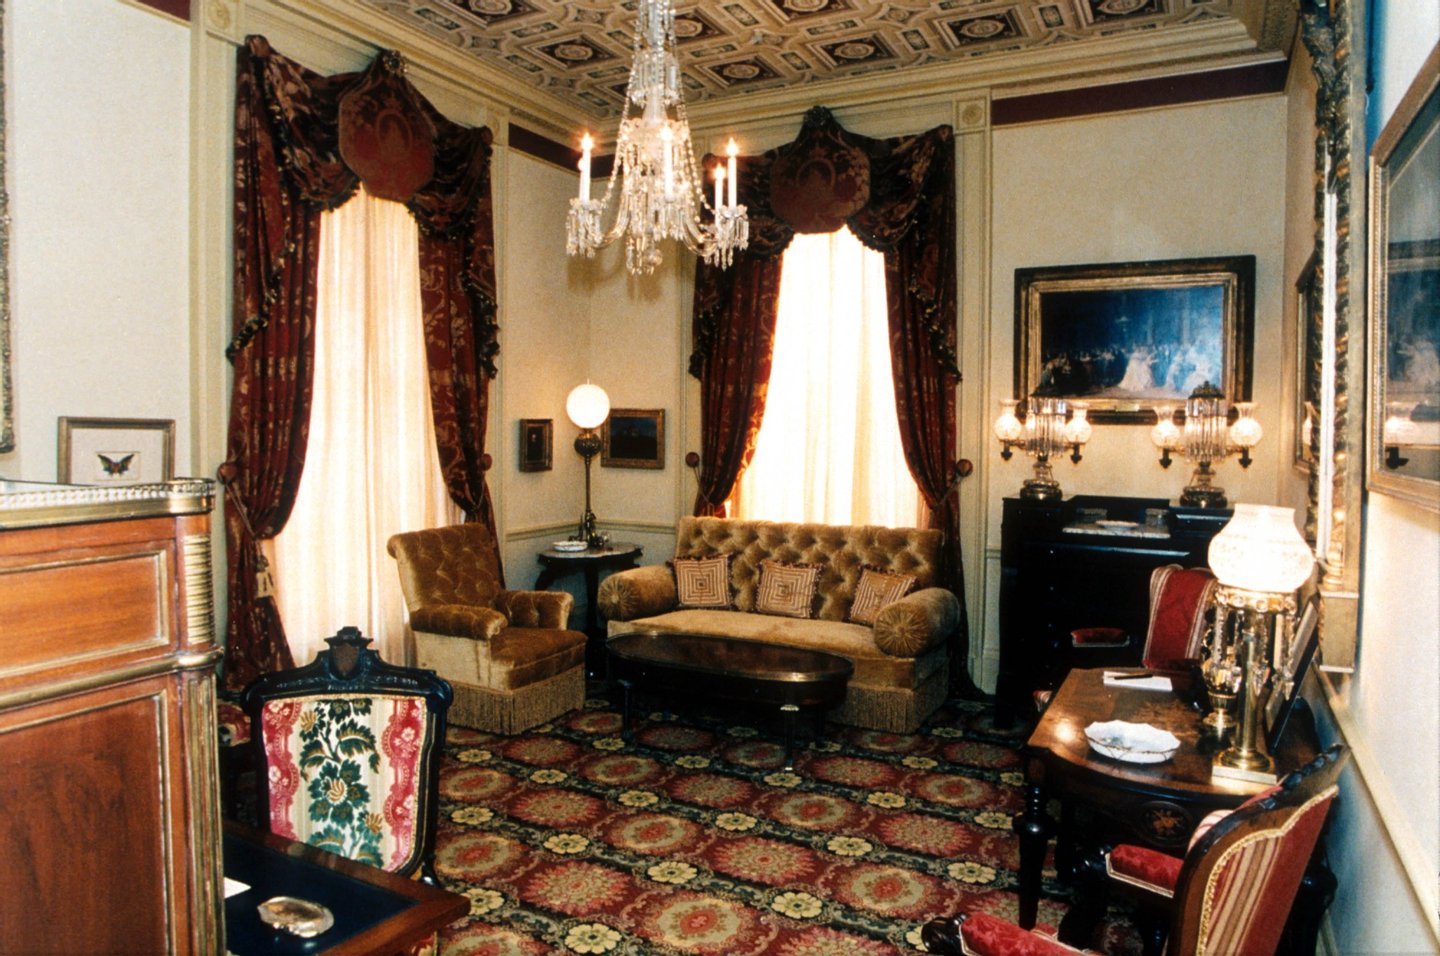 117616 03: The Lincoln room newly decorated by Hillary Clinton in the White House, Washington, DC, 1993. (Photo by Liaison)